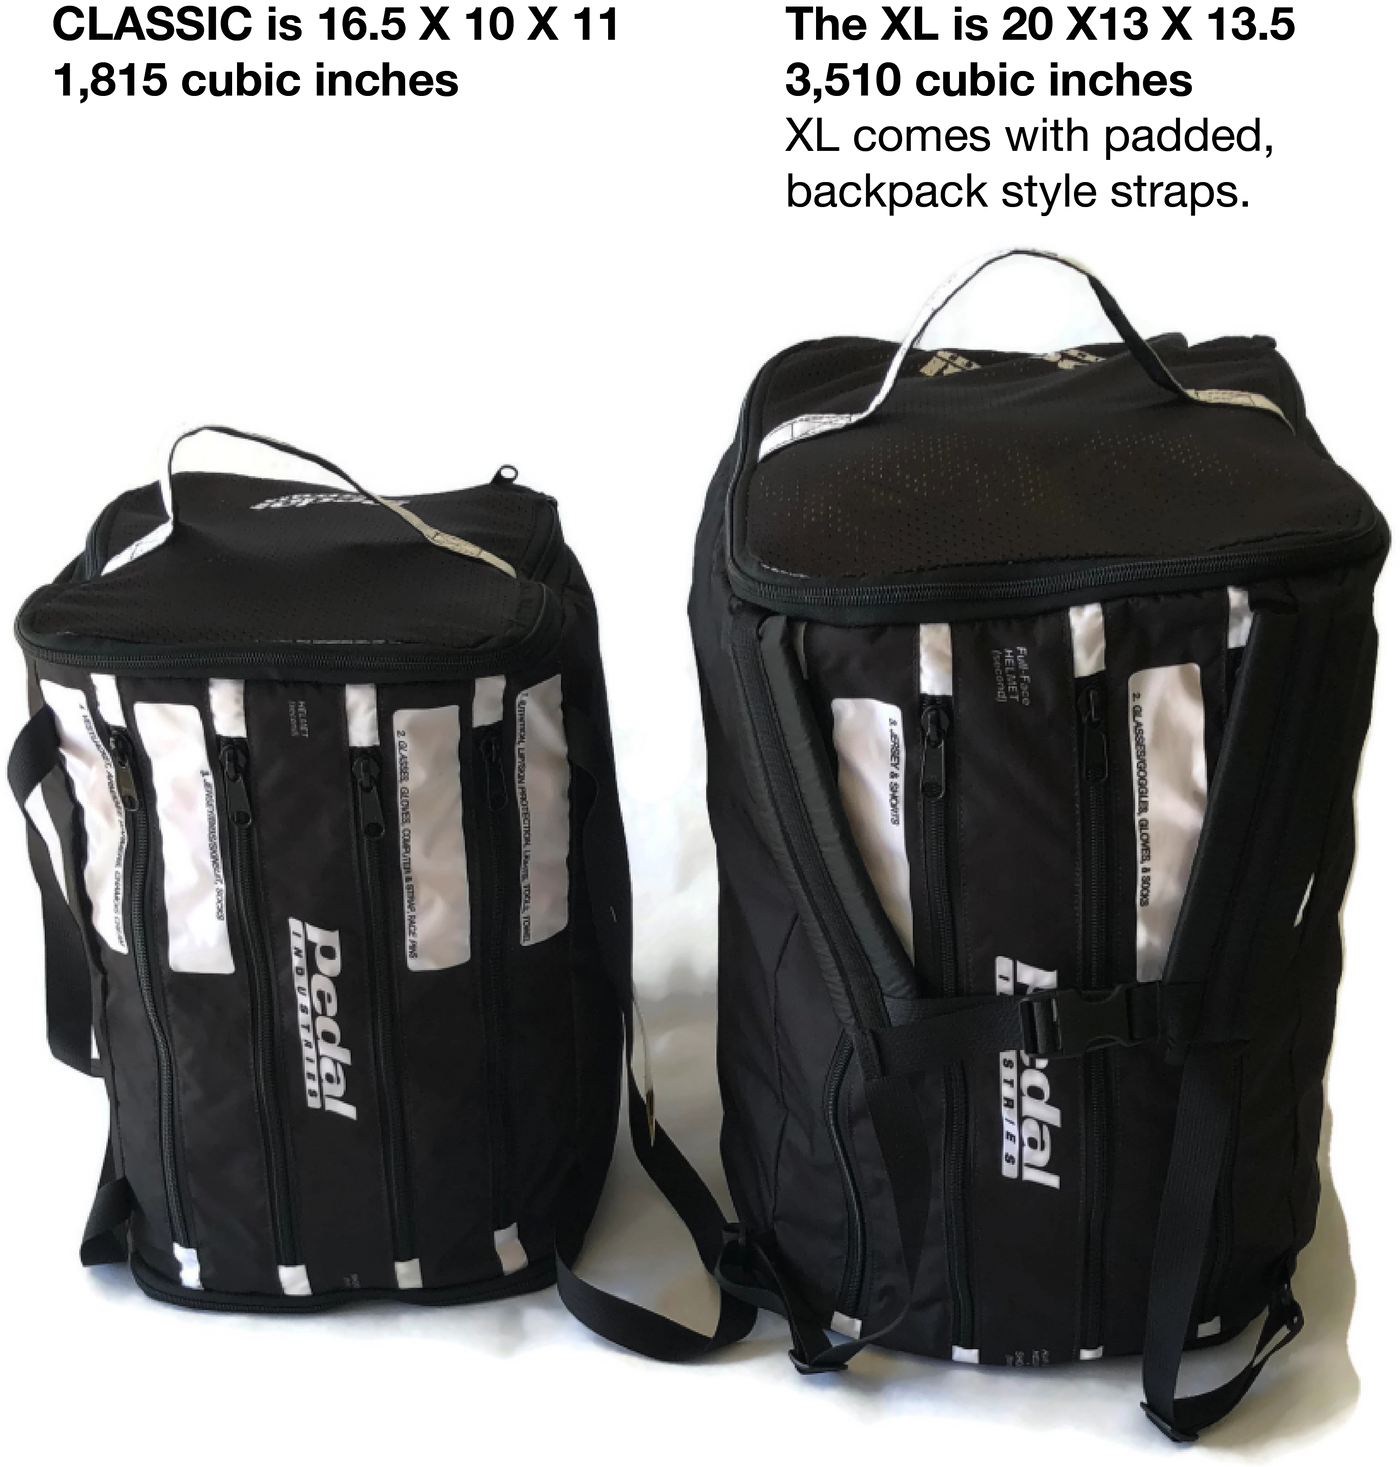 RED LABEL WILD CHILD CYCLING RACEDAY BAG™